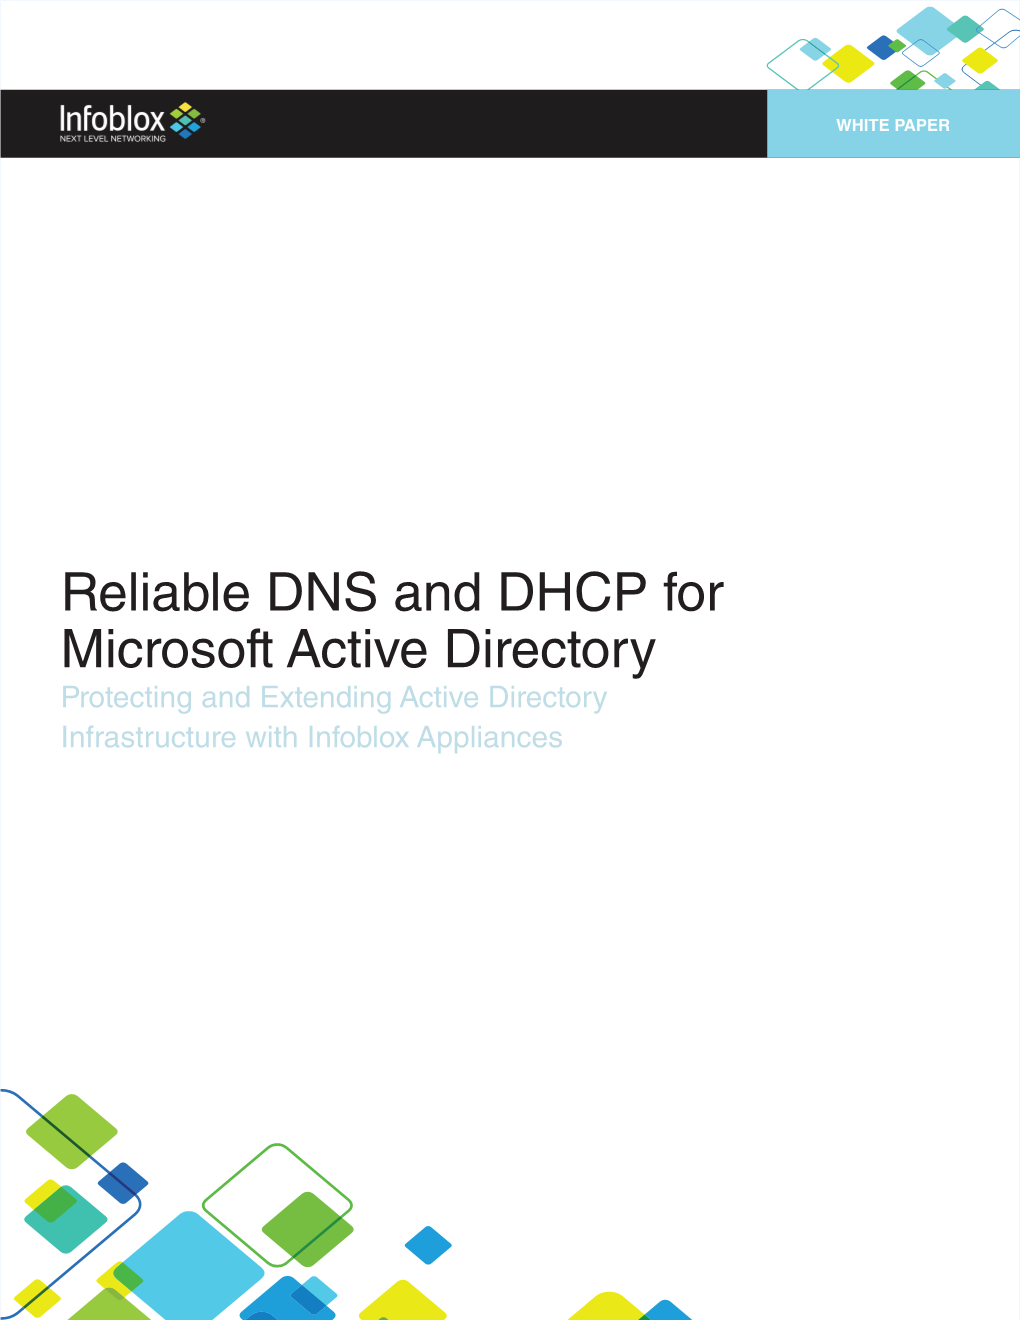 Reliable DNS and DHCP for Microsoft Active Directory